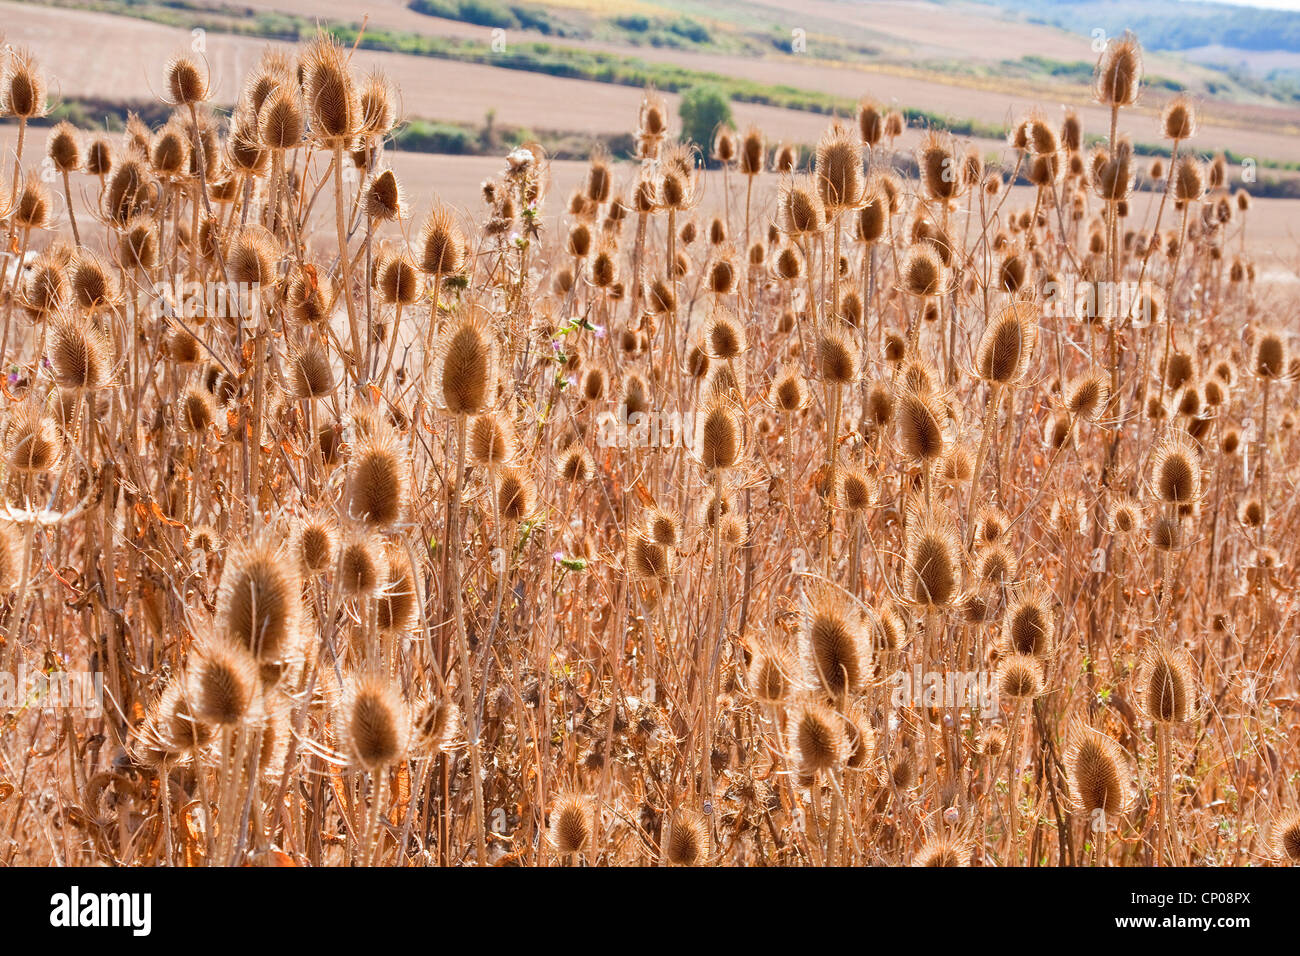 withered thistles at the edge of the Way of St. James between Villamayor del Rio and Belorado, Spain, Kastilien und Le�n, Burgos Stock Photo